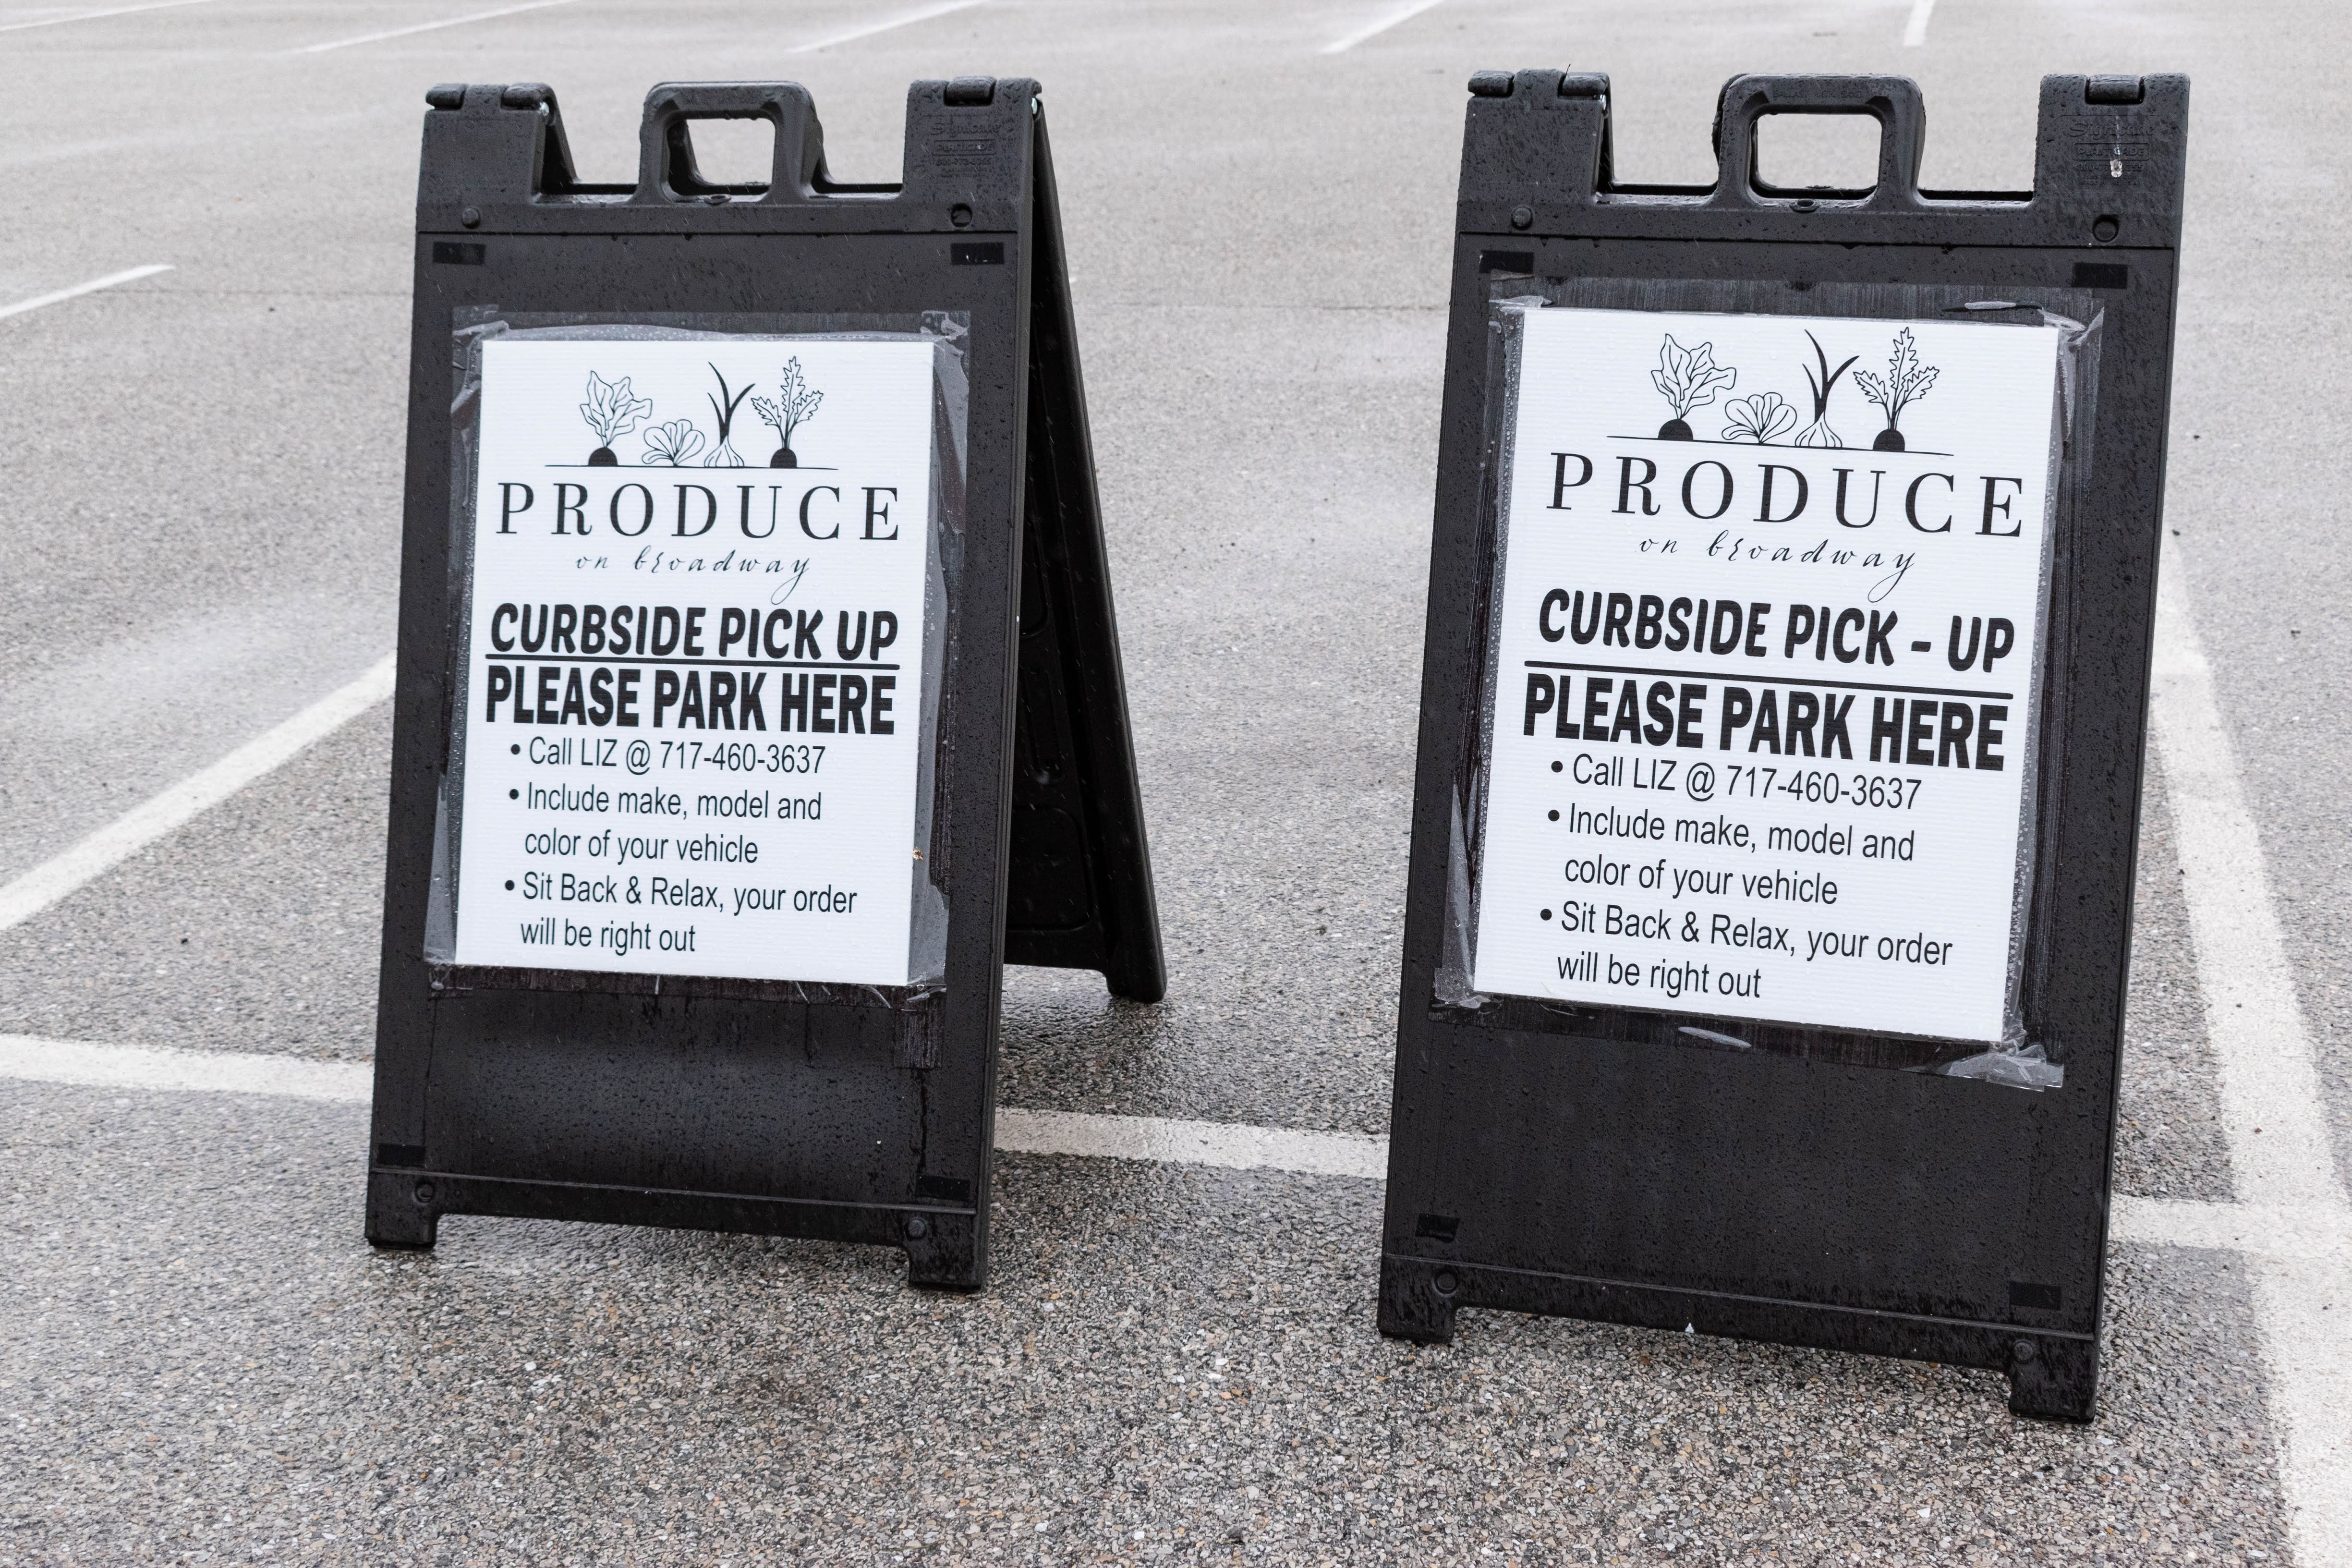 Markets merchants are offering curbside pickup for customers.